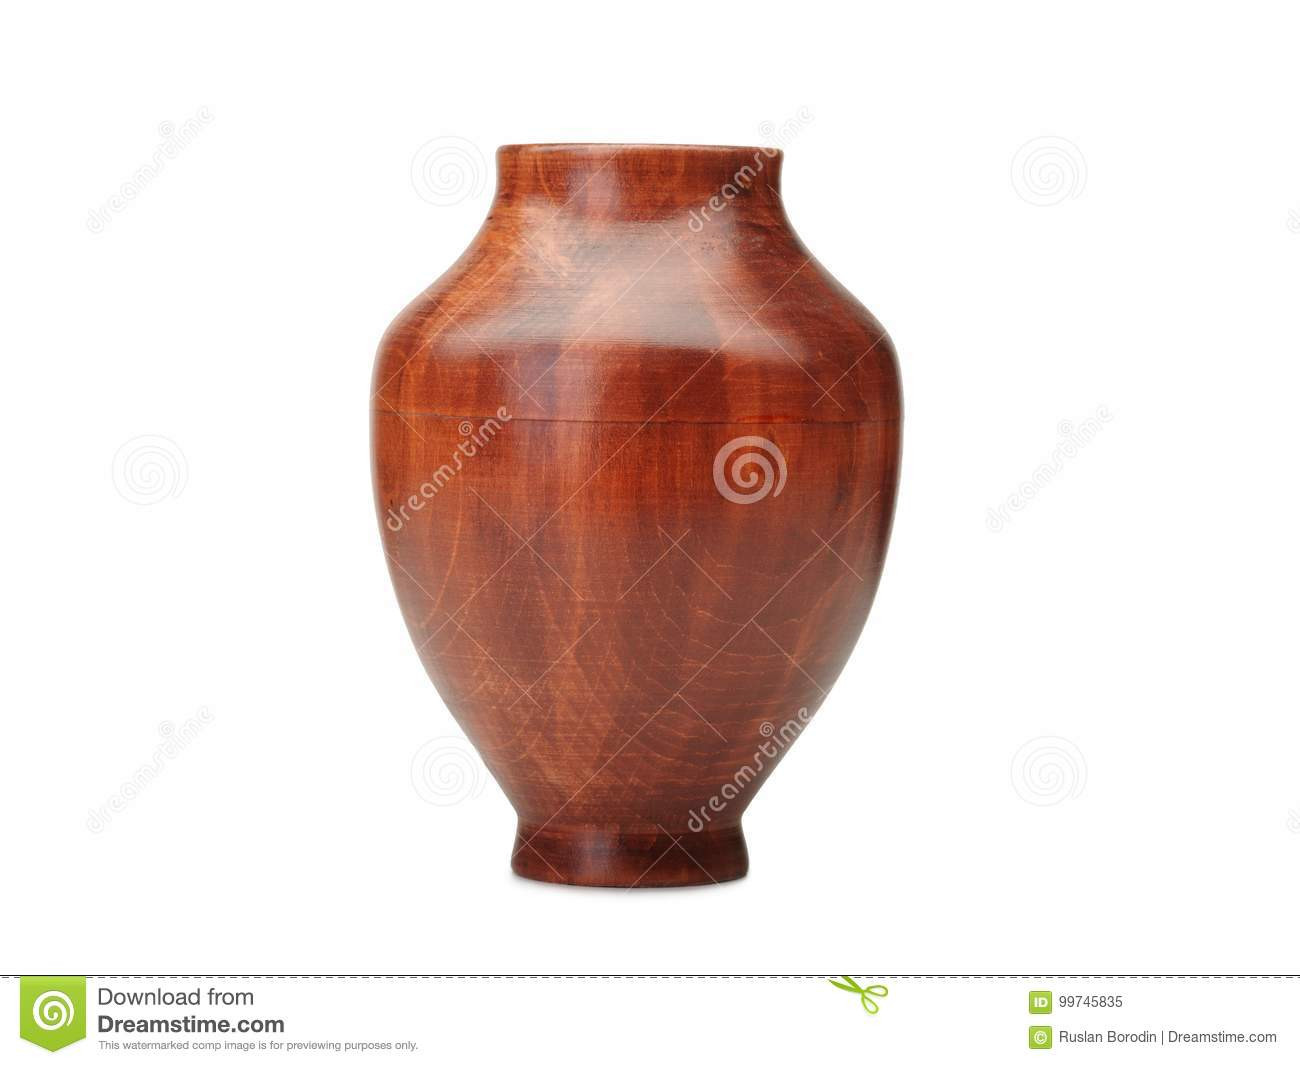 17 attractive Blue and White Floral Ceramic Vase 2024 free download blue and white floral ceramic vase of flower vase made of wood isolated on white background stock image within download flower vase made of wood isolated on white background stock image imag